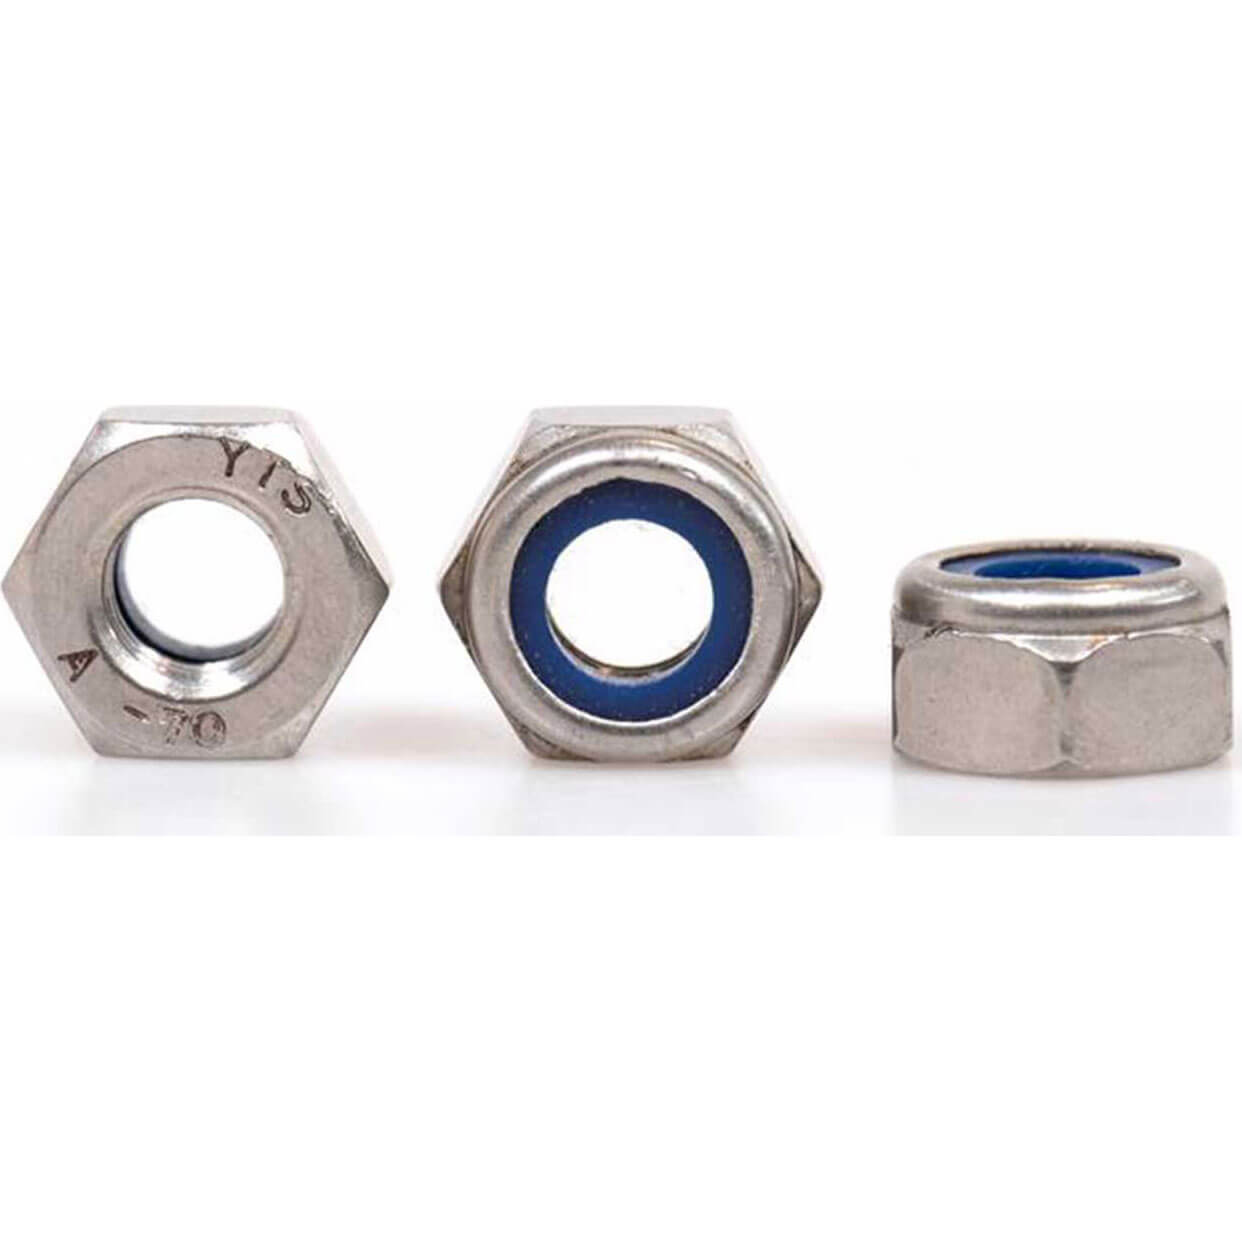 Image of Sirius A4 316 Stainless Steel Nyloc Nuts M5